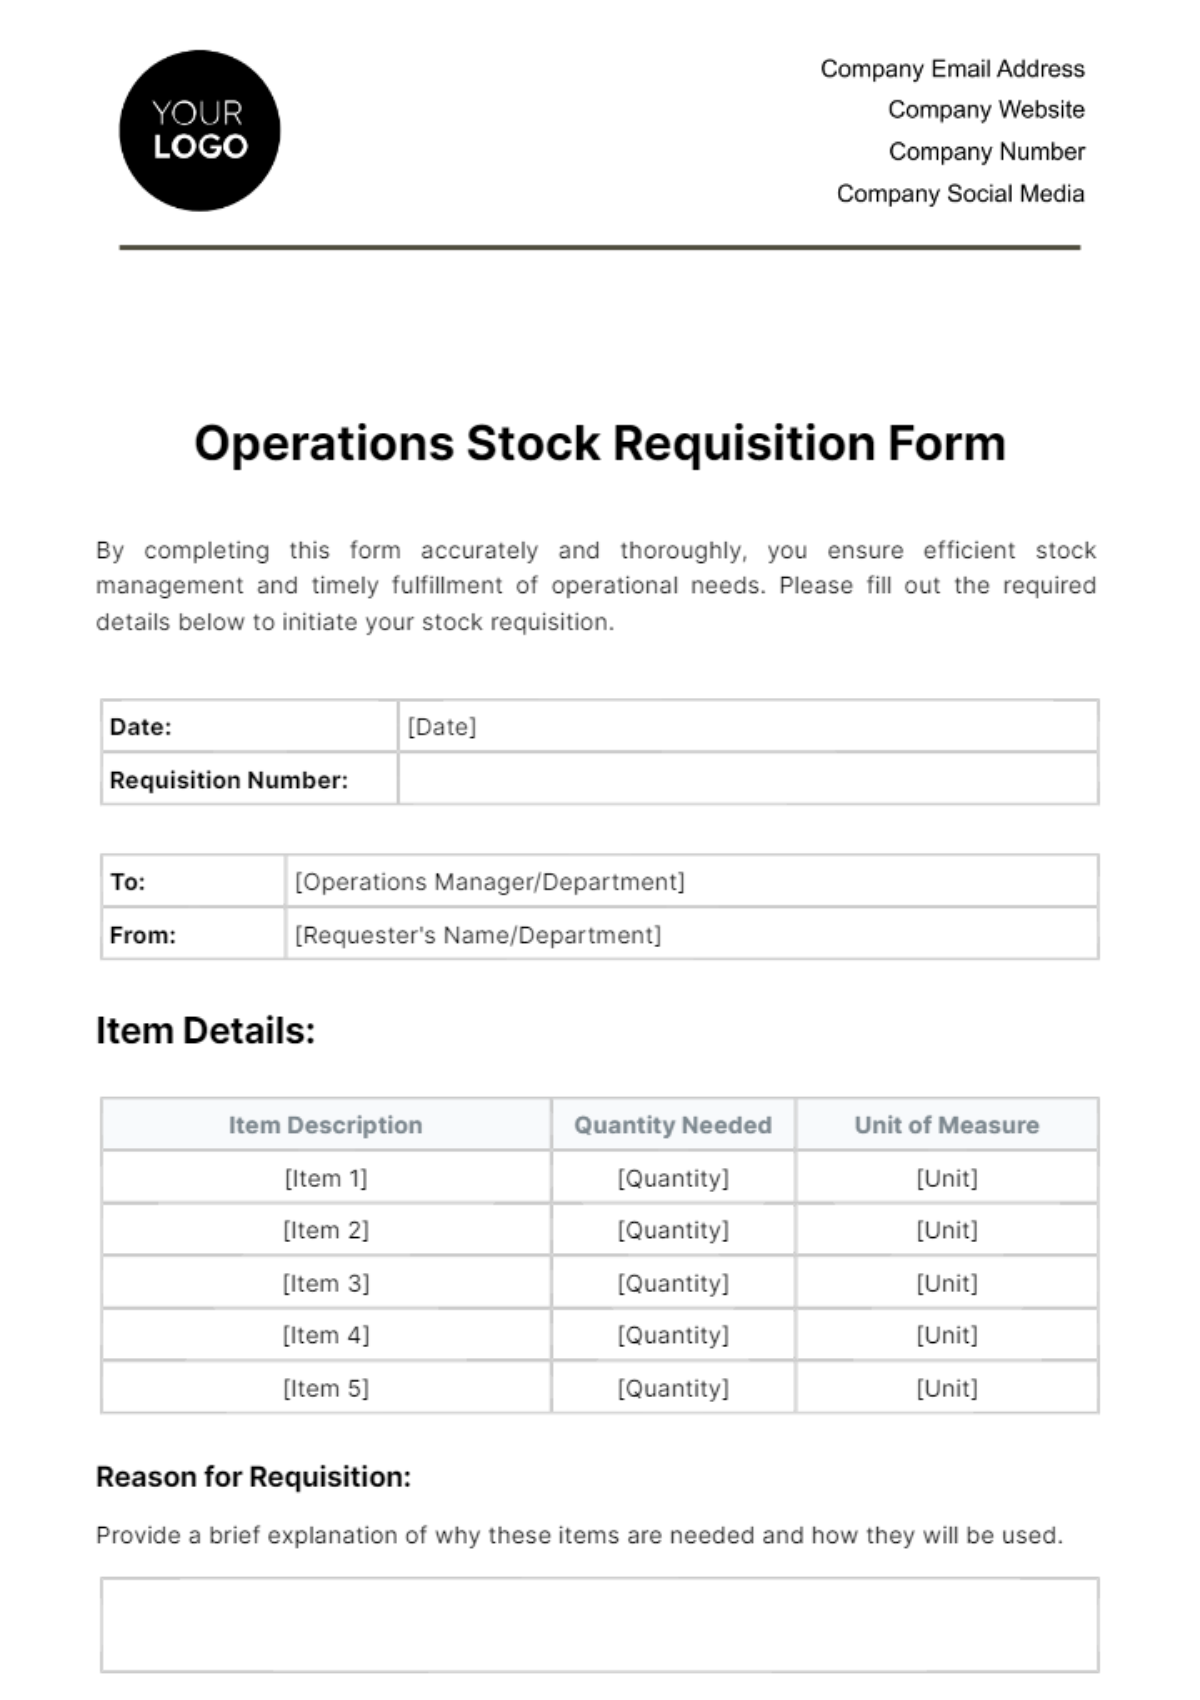 Operations Stock Requisition Form Template